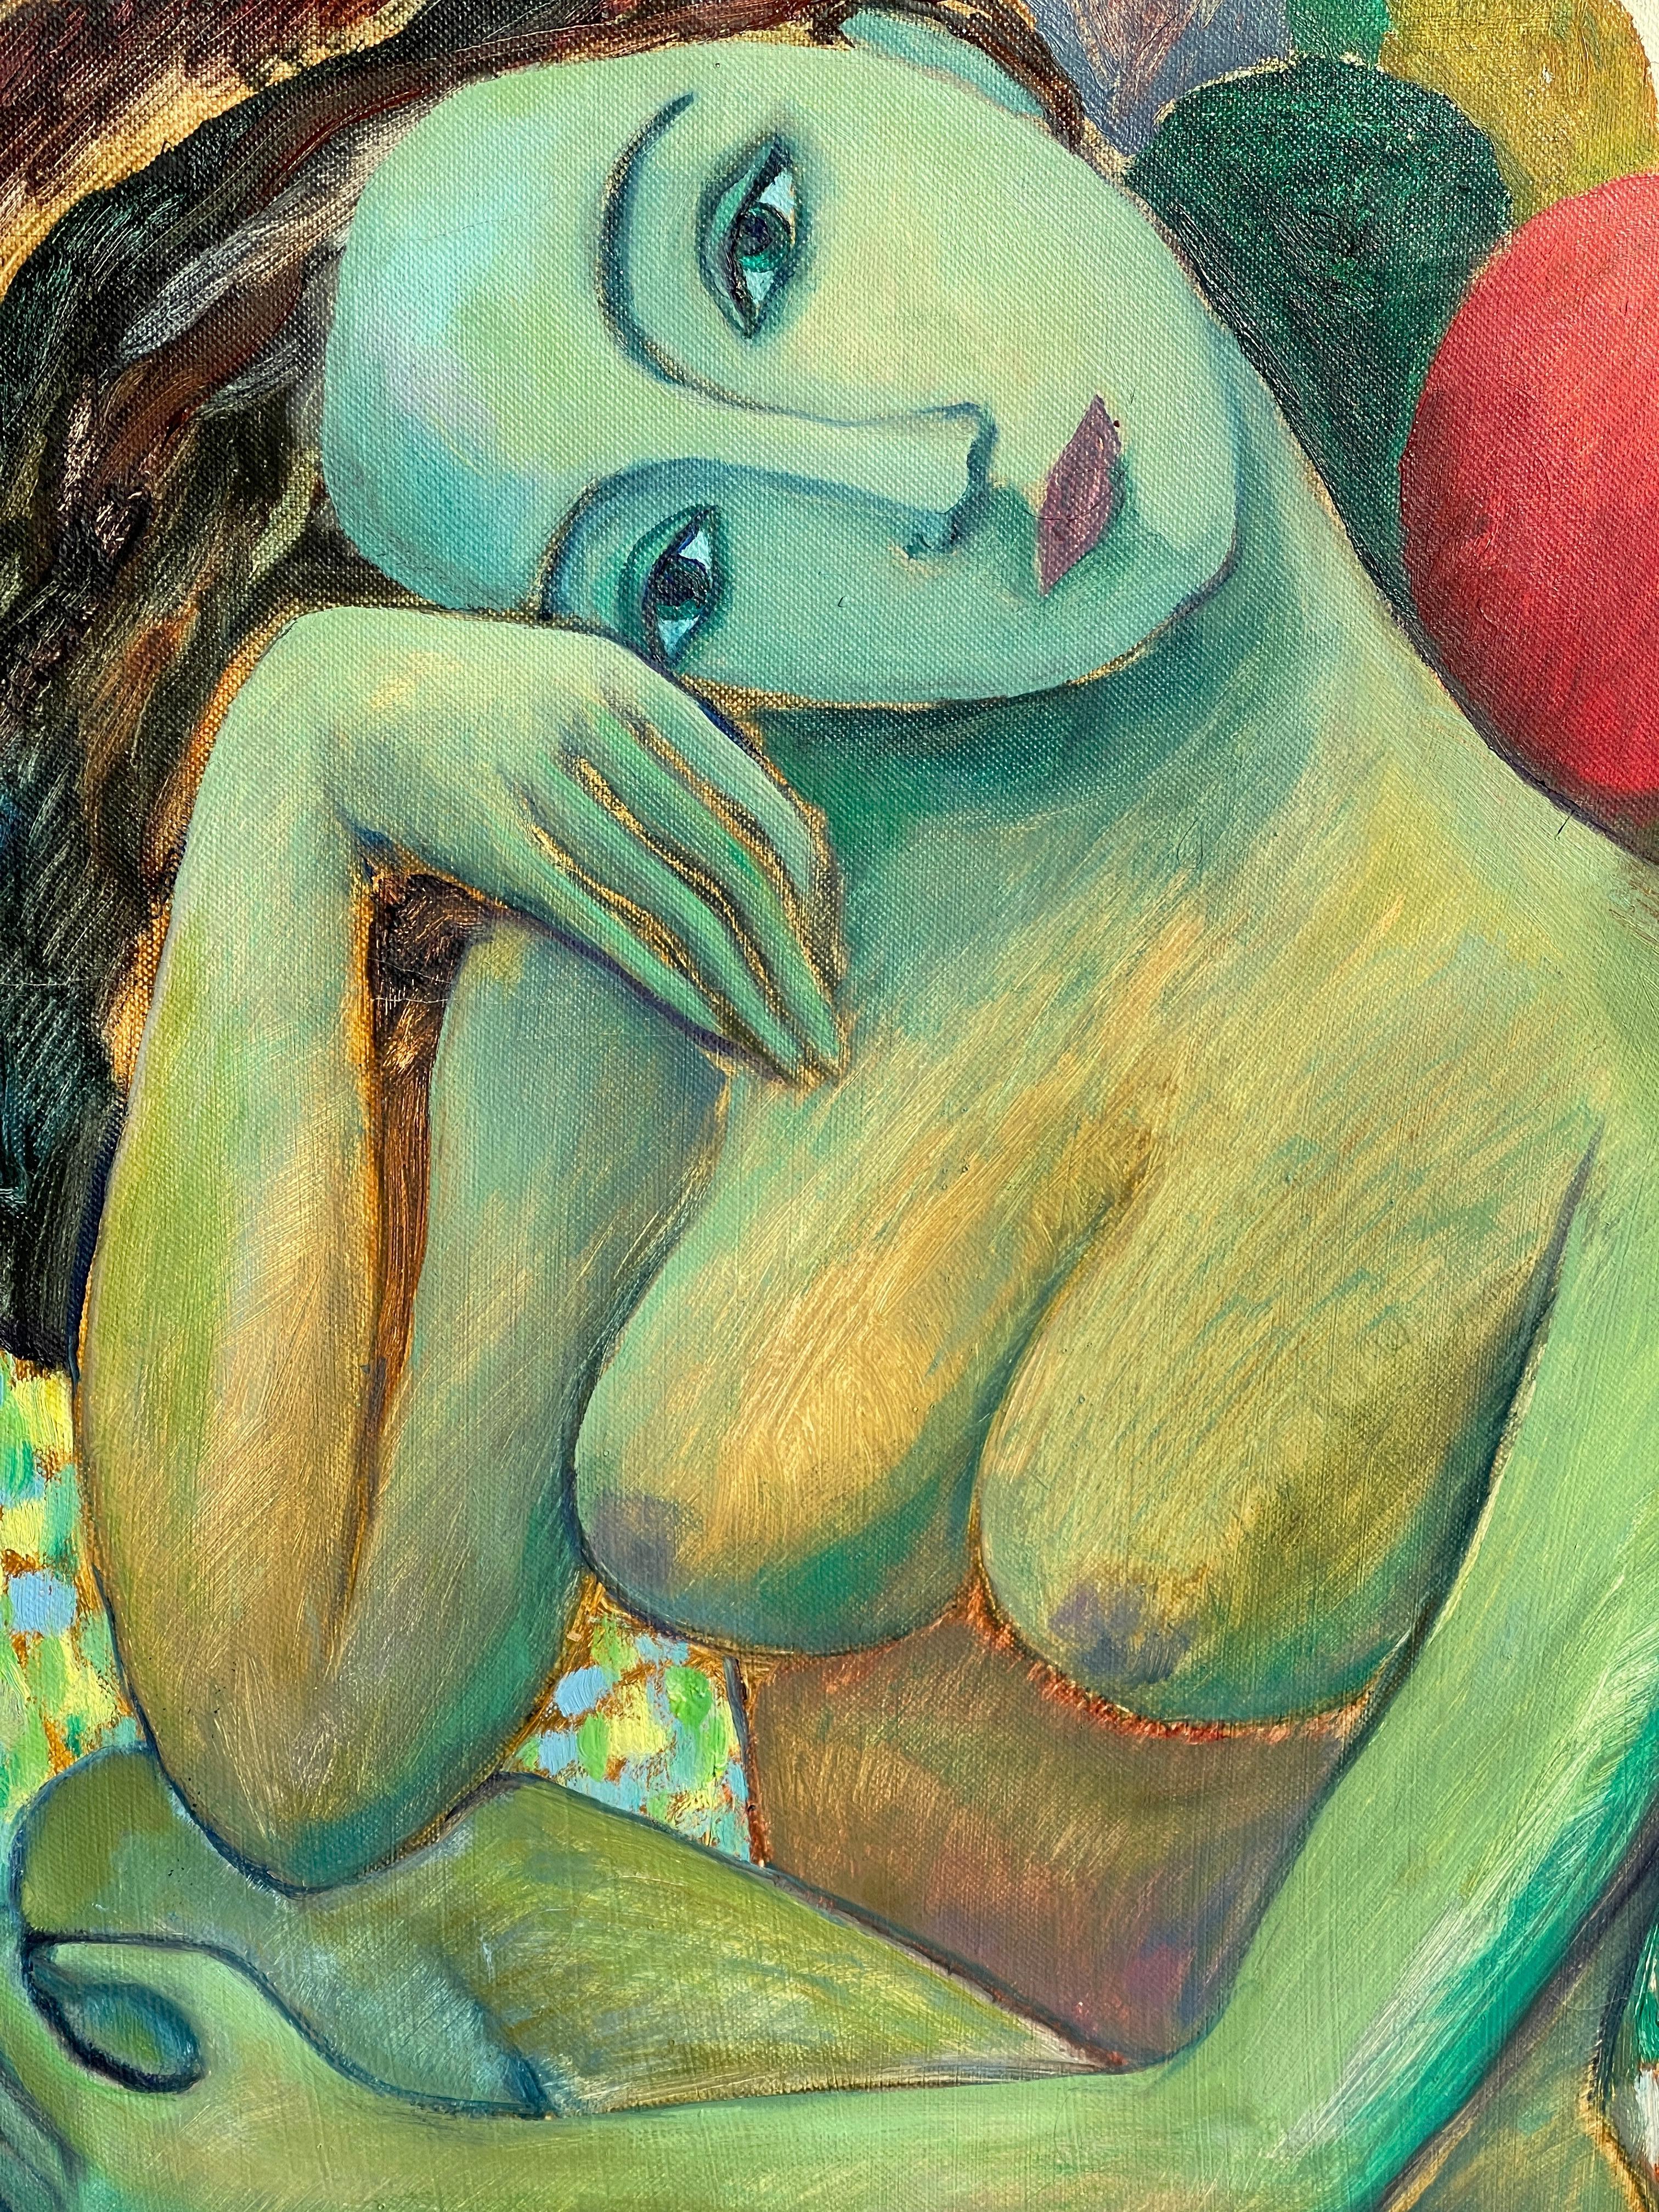 Post-Modern Oil on Canvas Painting of a Nude Woman by O. Phnumohosa, Dated 1997